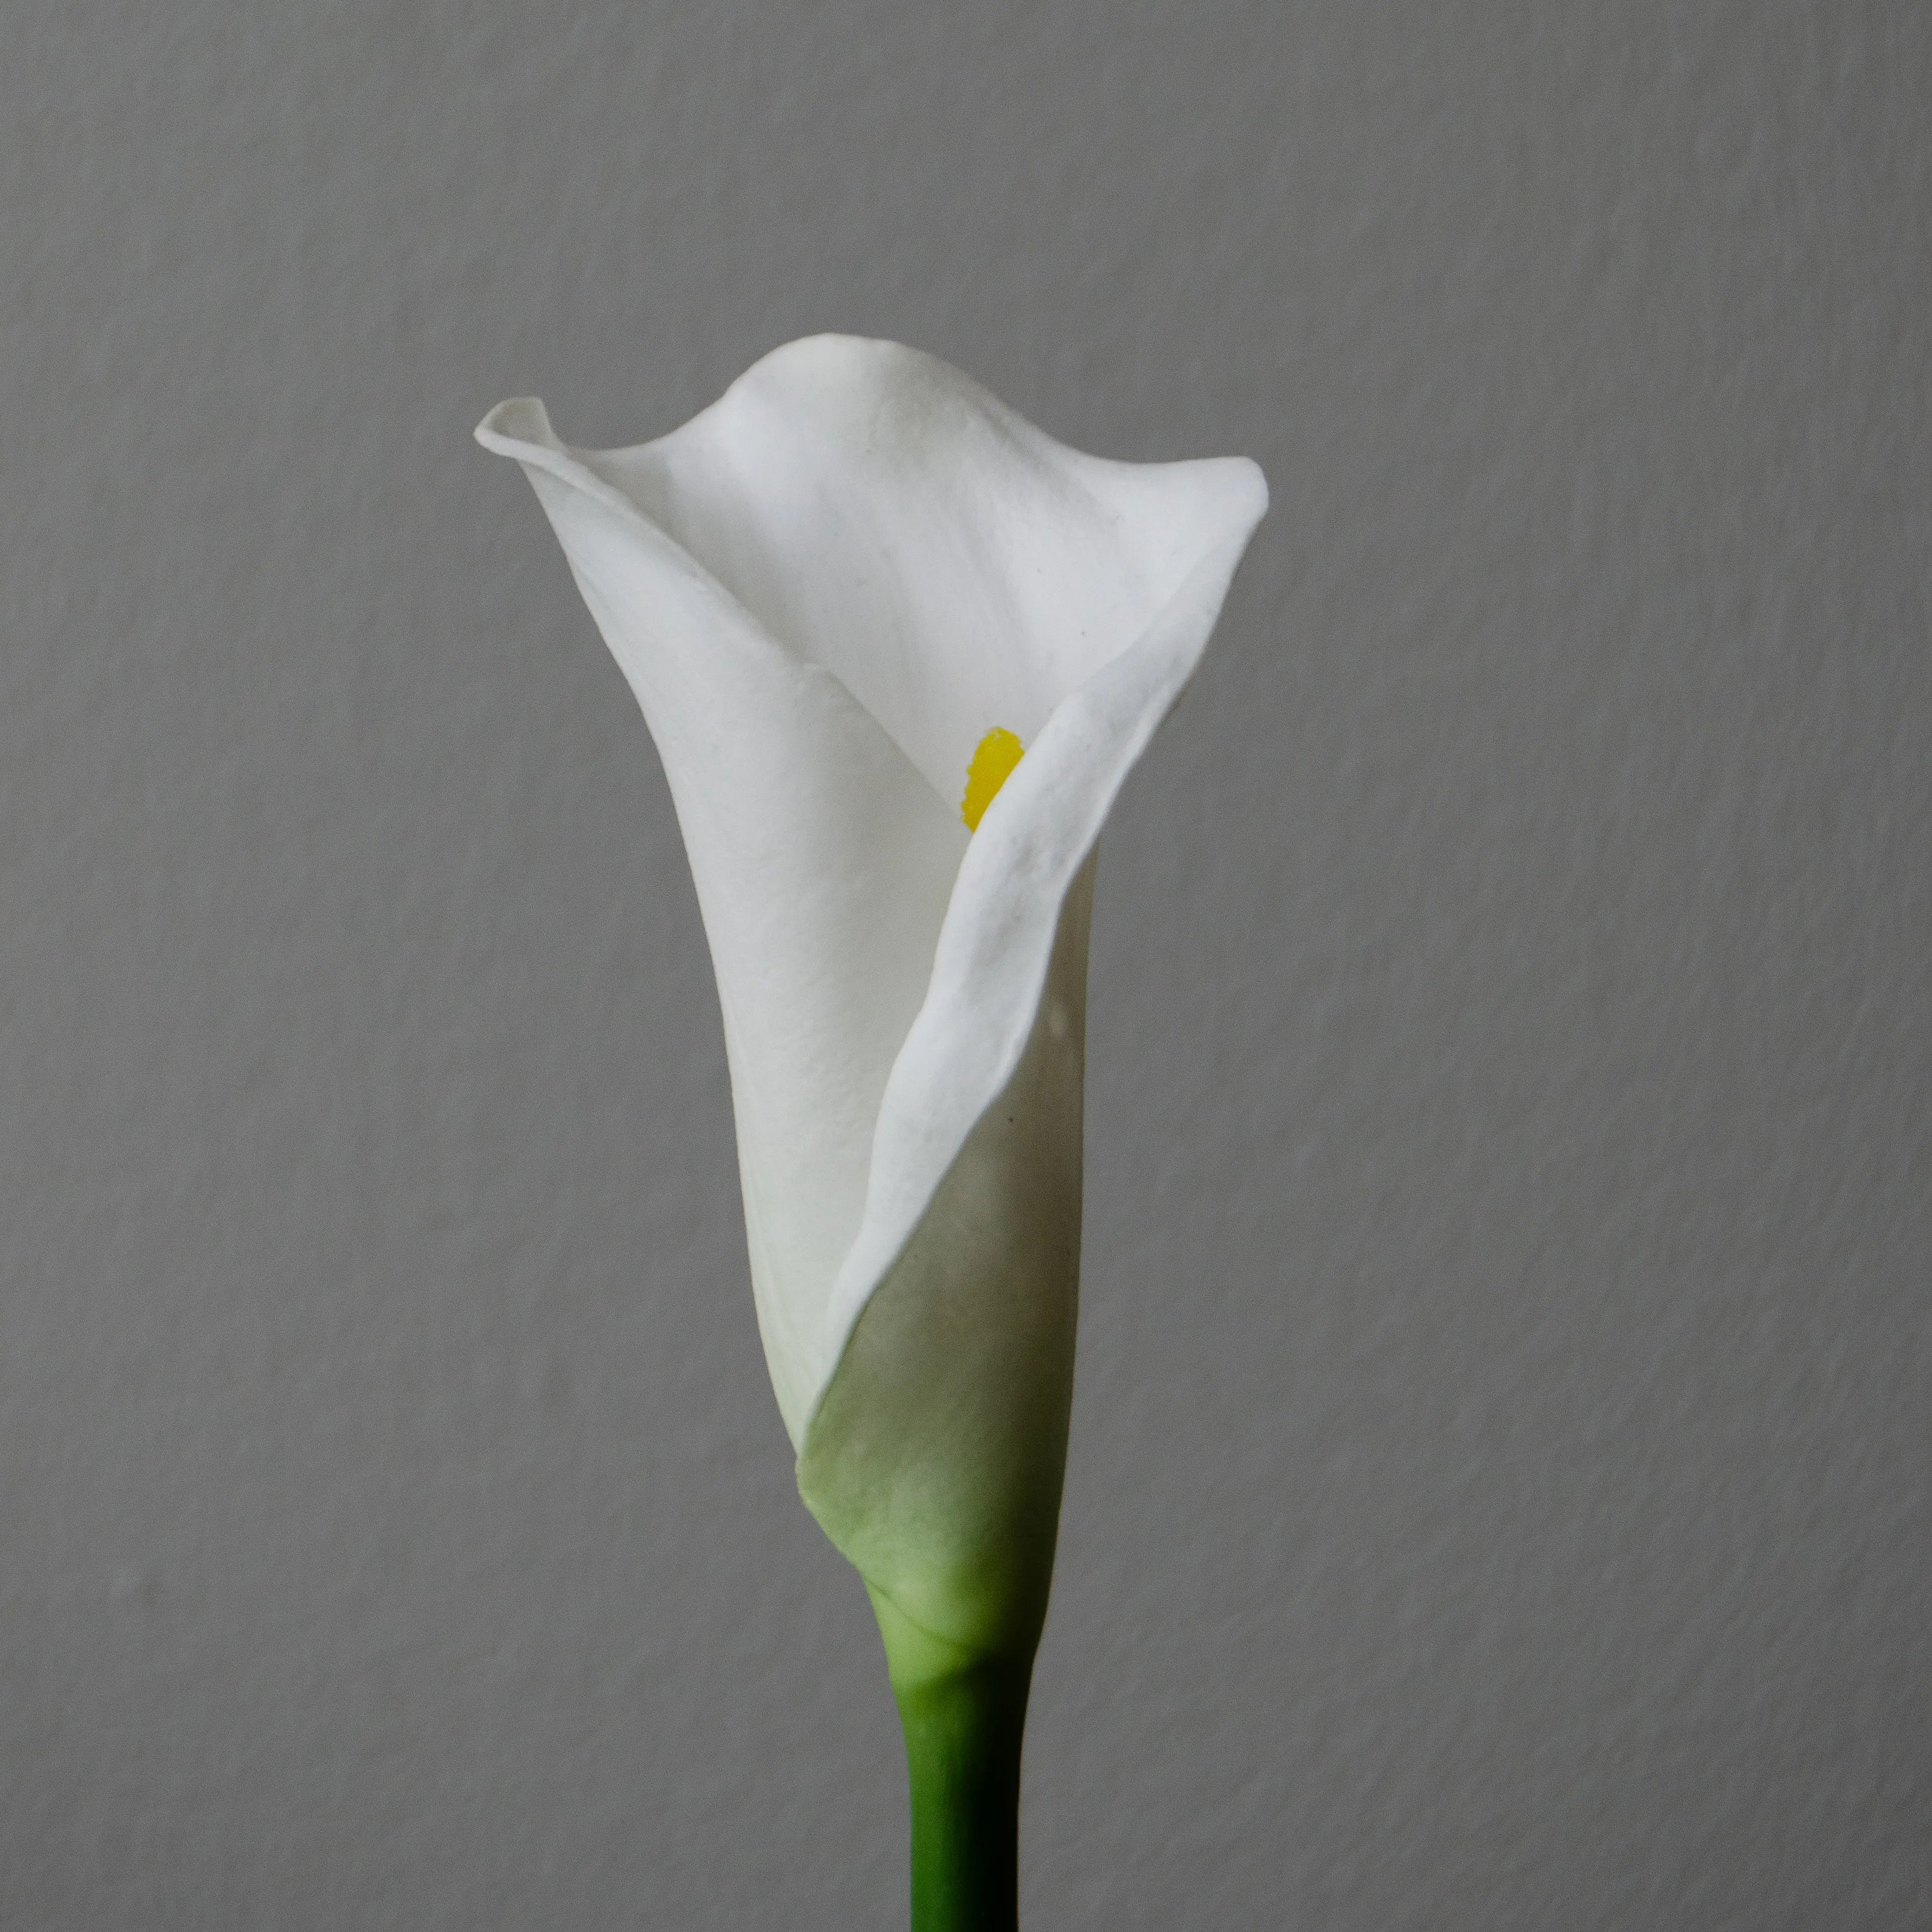 Artificial Calla Lily Flower from Botané